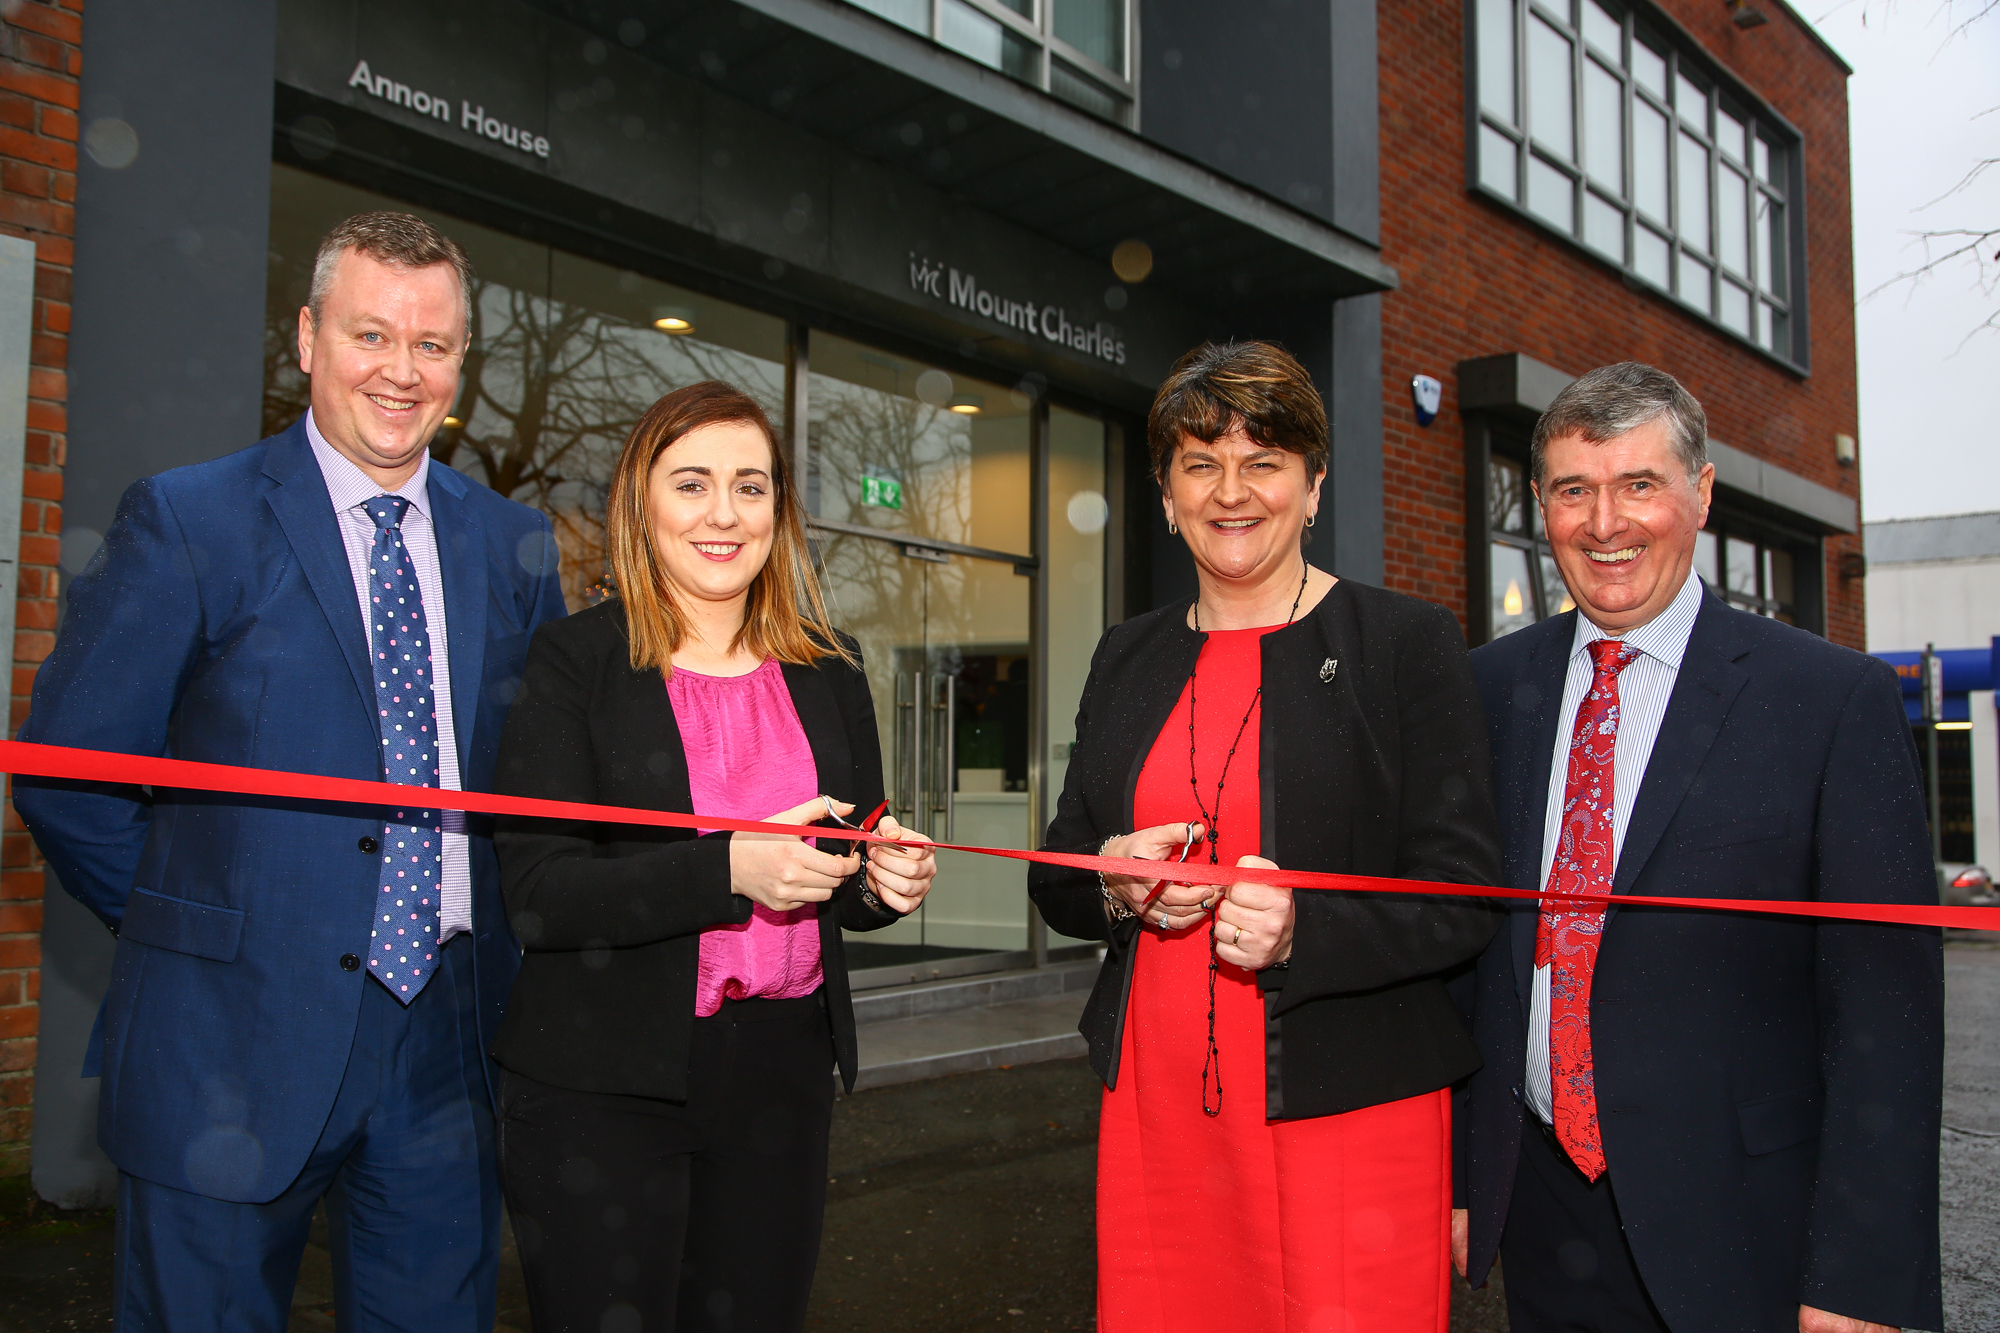 Opening of £1.6m HQ signals new era for Mount Charles